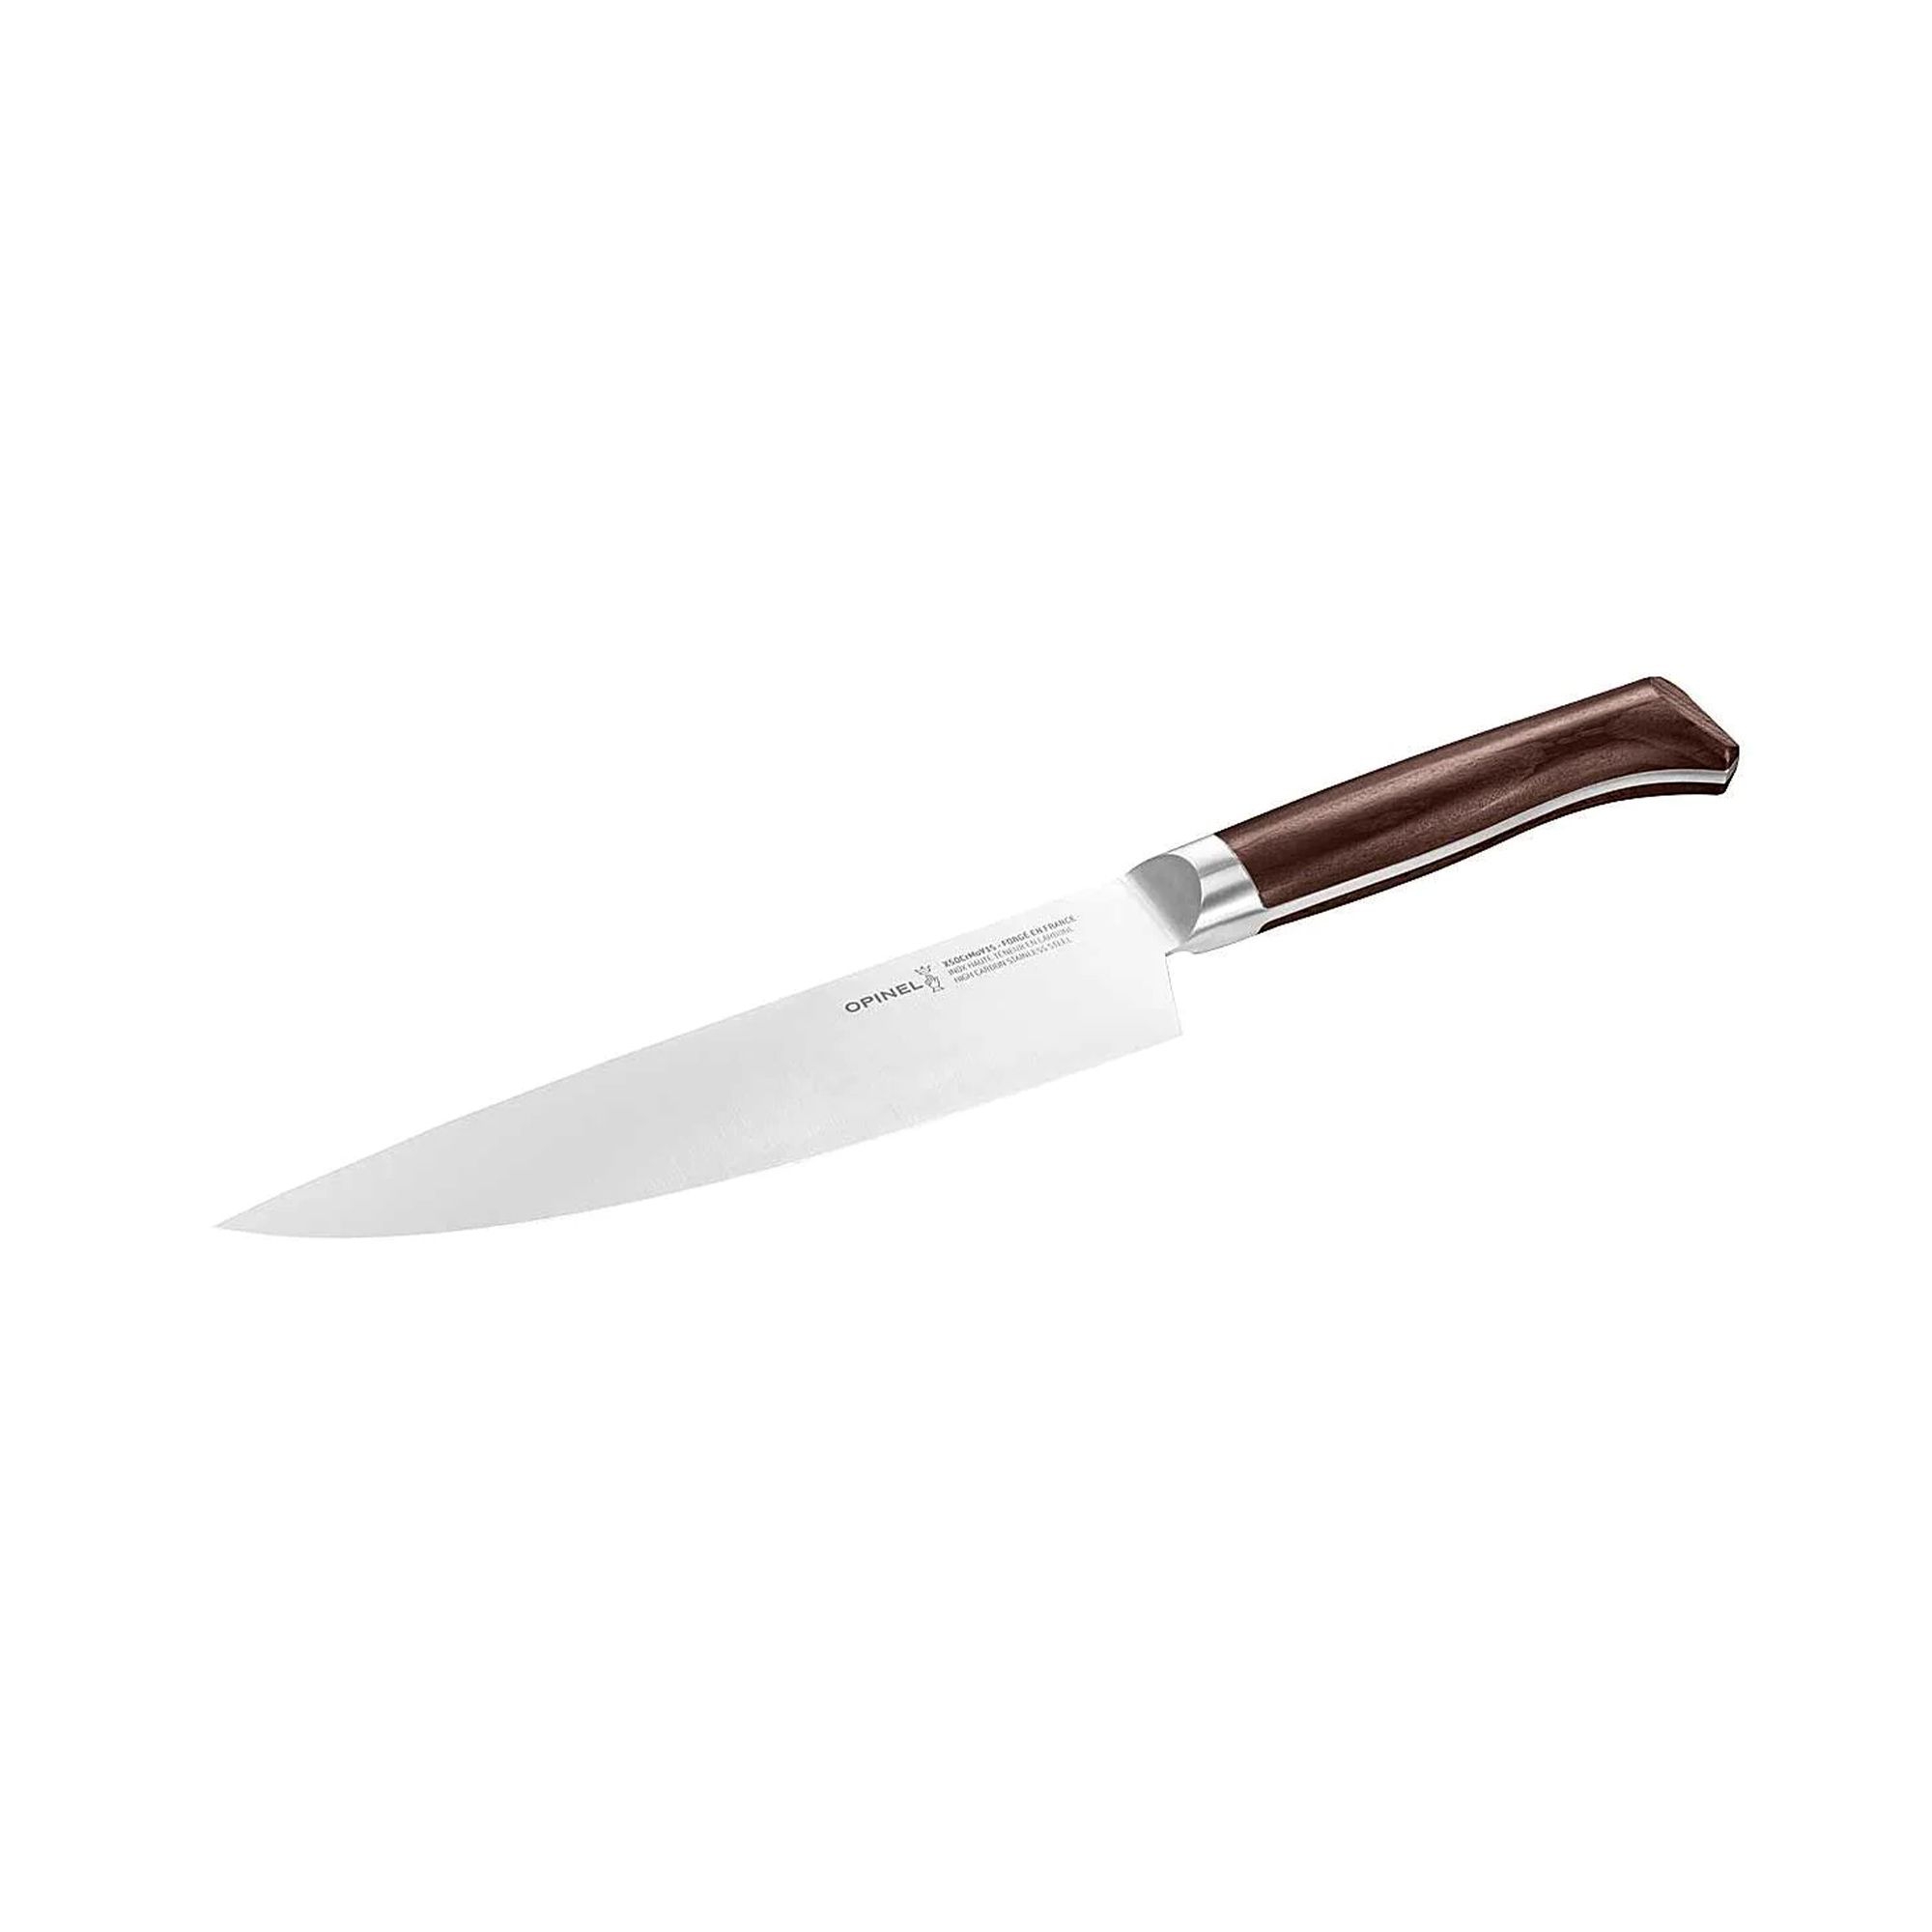 Opinel - FORGES 1890 - Chef's knife